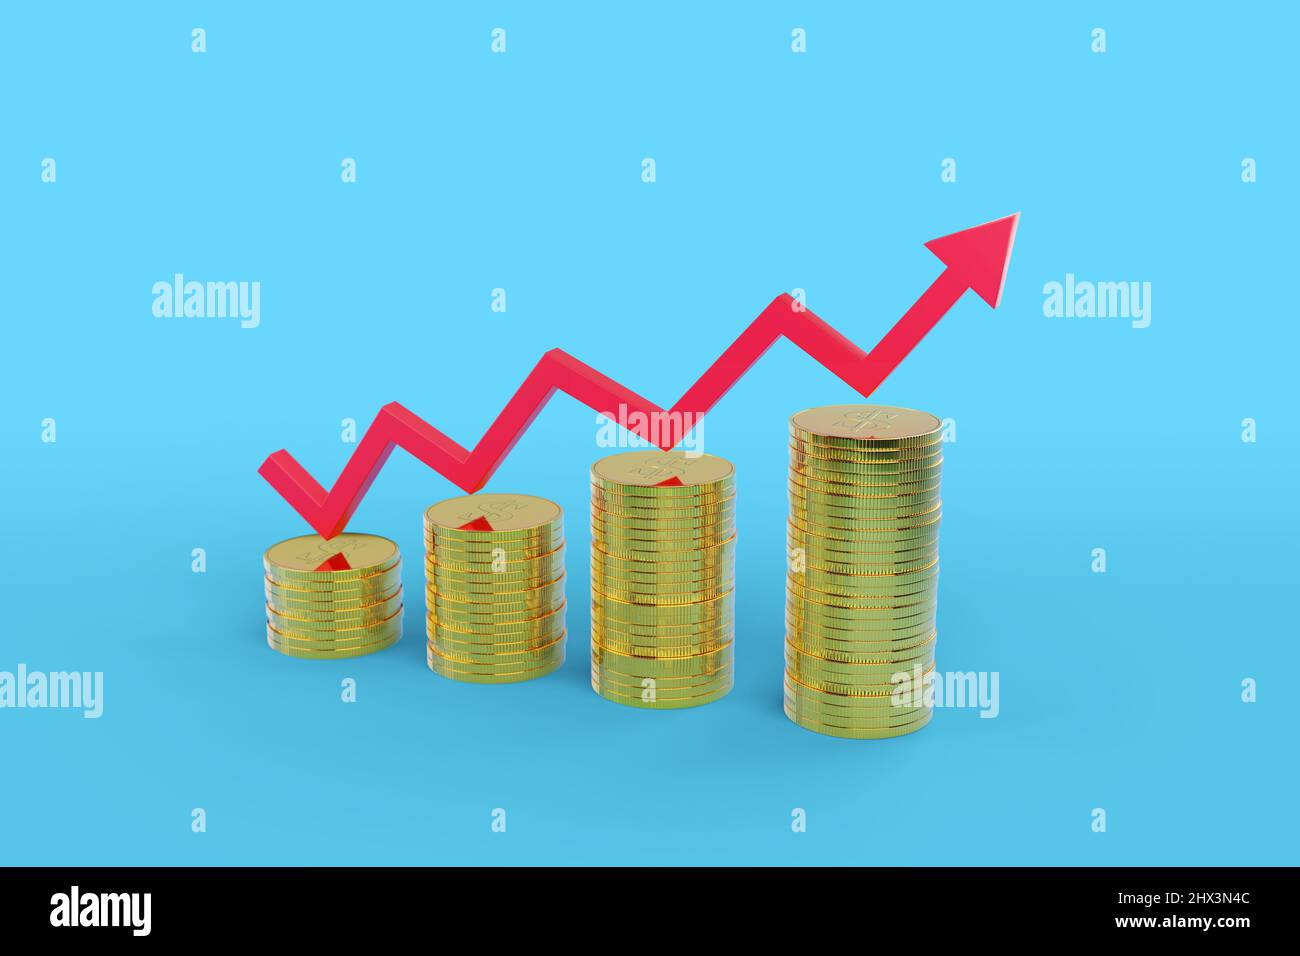 Growth bar chart with stacks of coins isolated on blue background. 3D illustration. Stock Photo